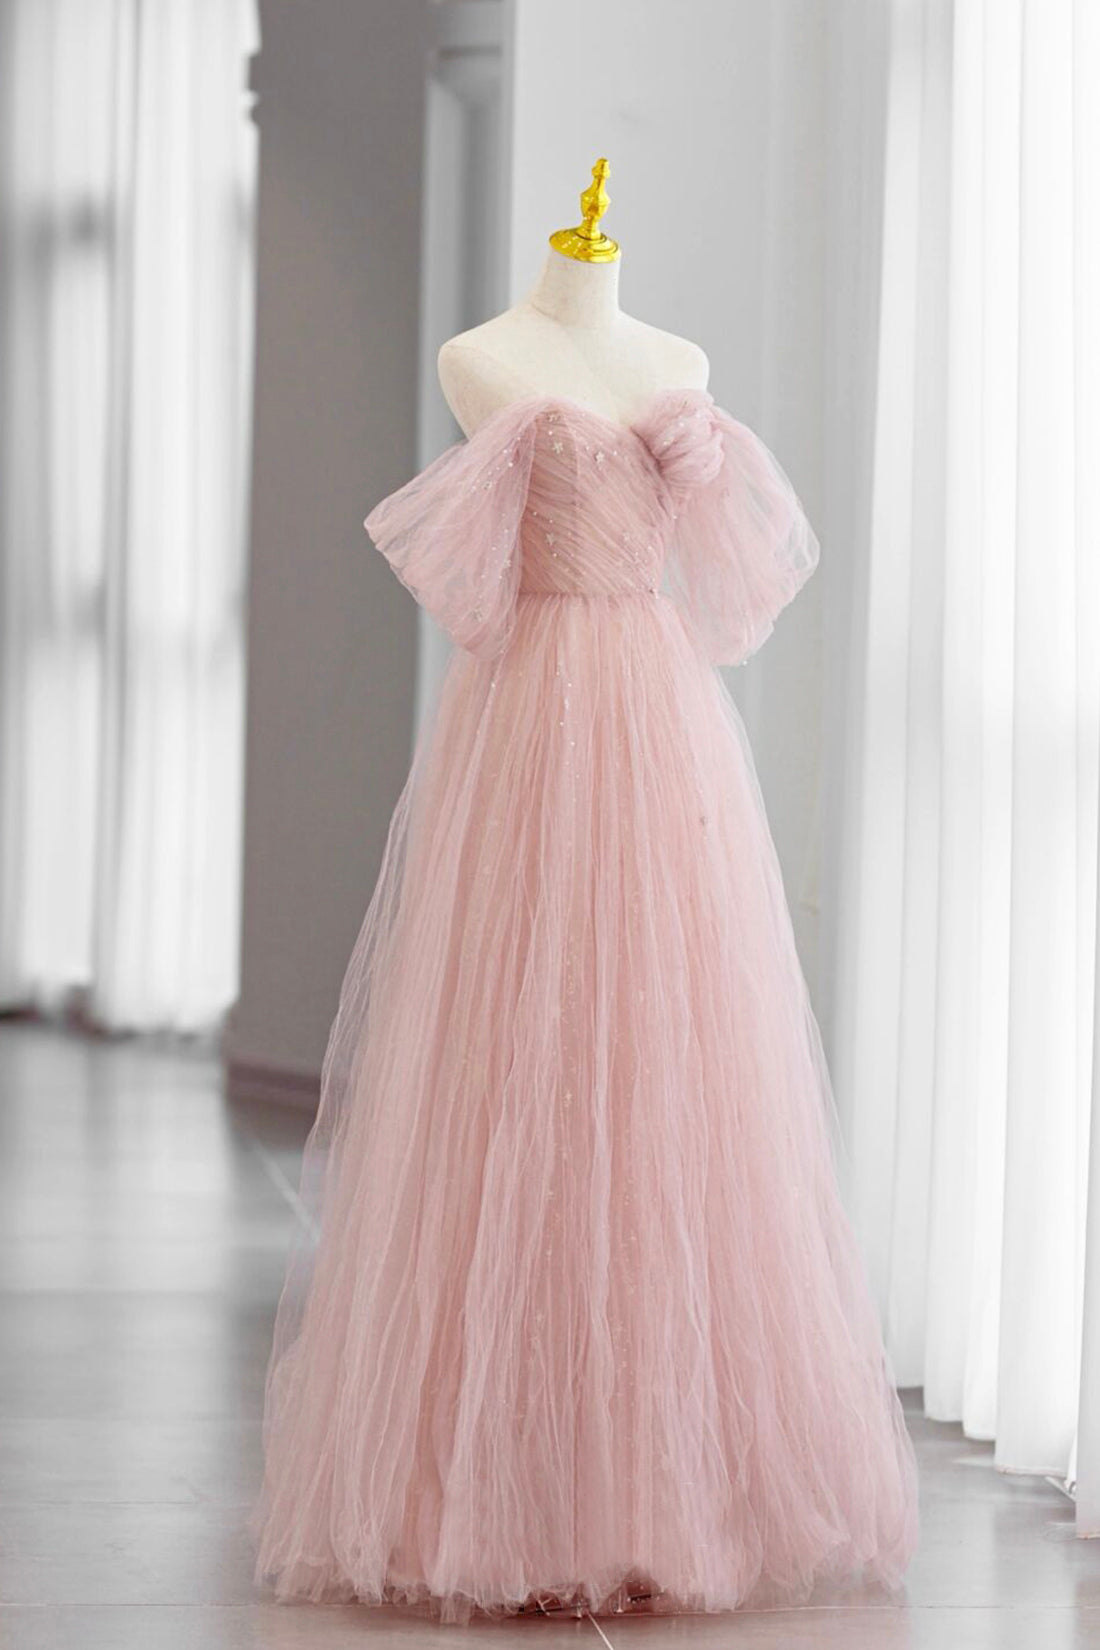 Bridesmaid Dress Website, Pink Tulle Floor Length Prom Dress, Cute A-Line Evening Party Dress